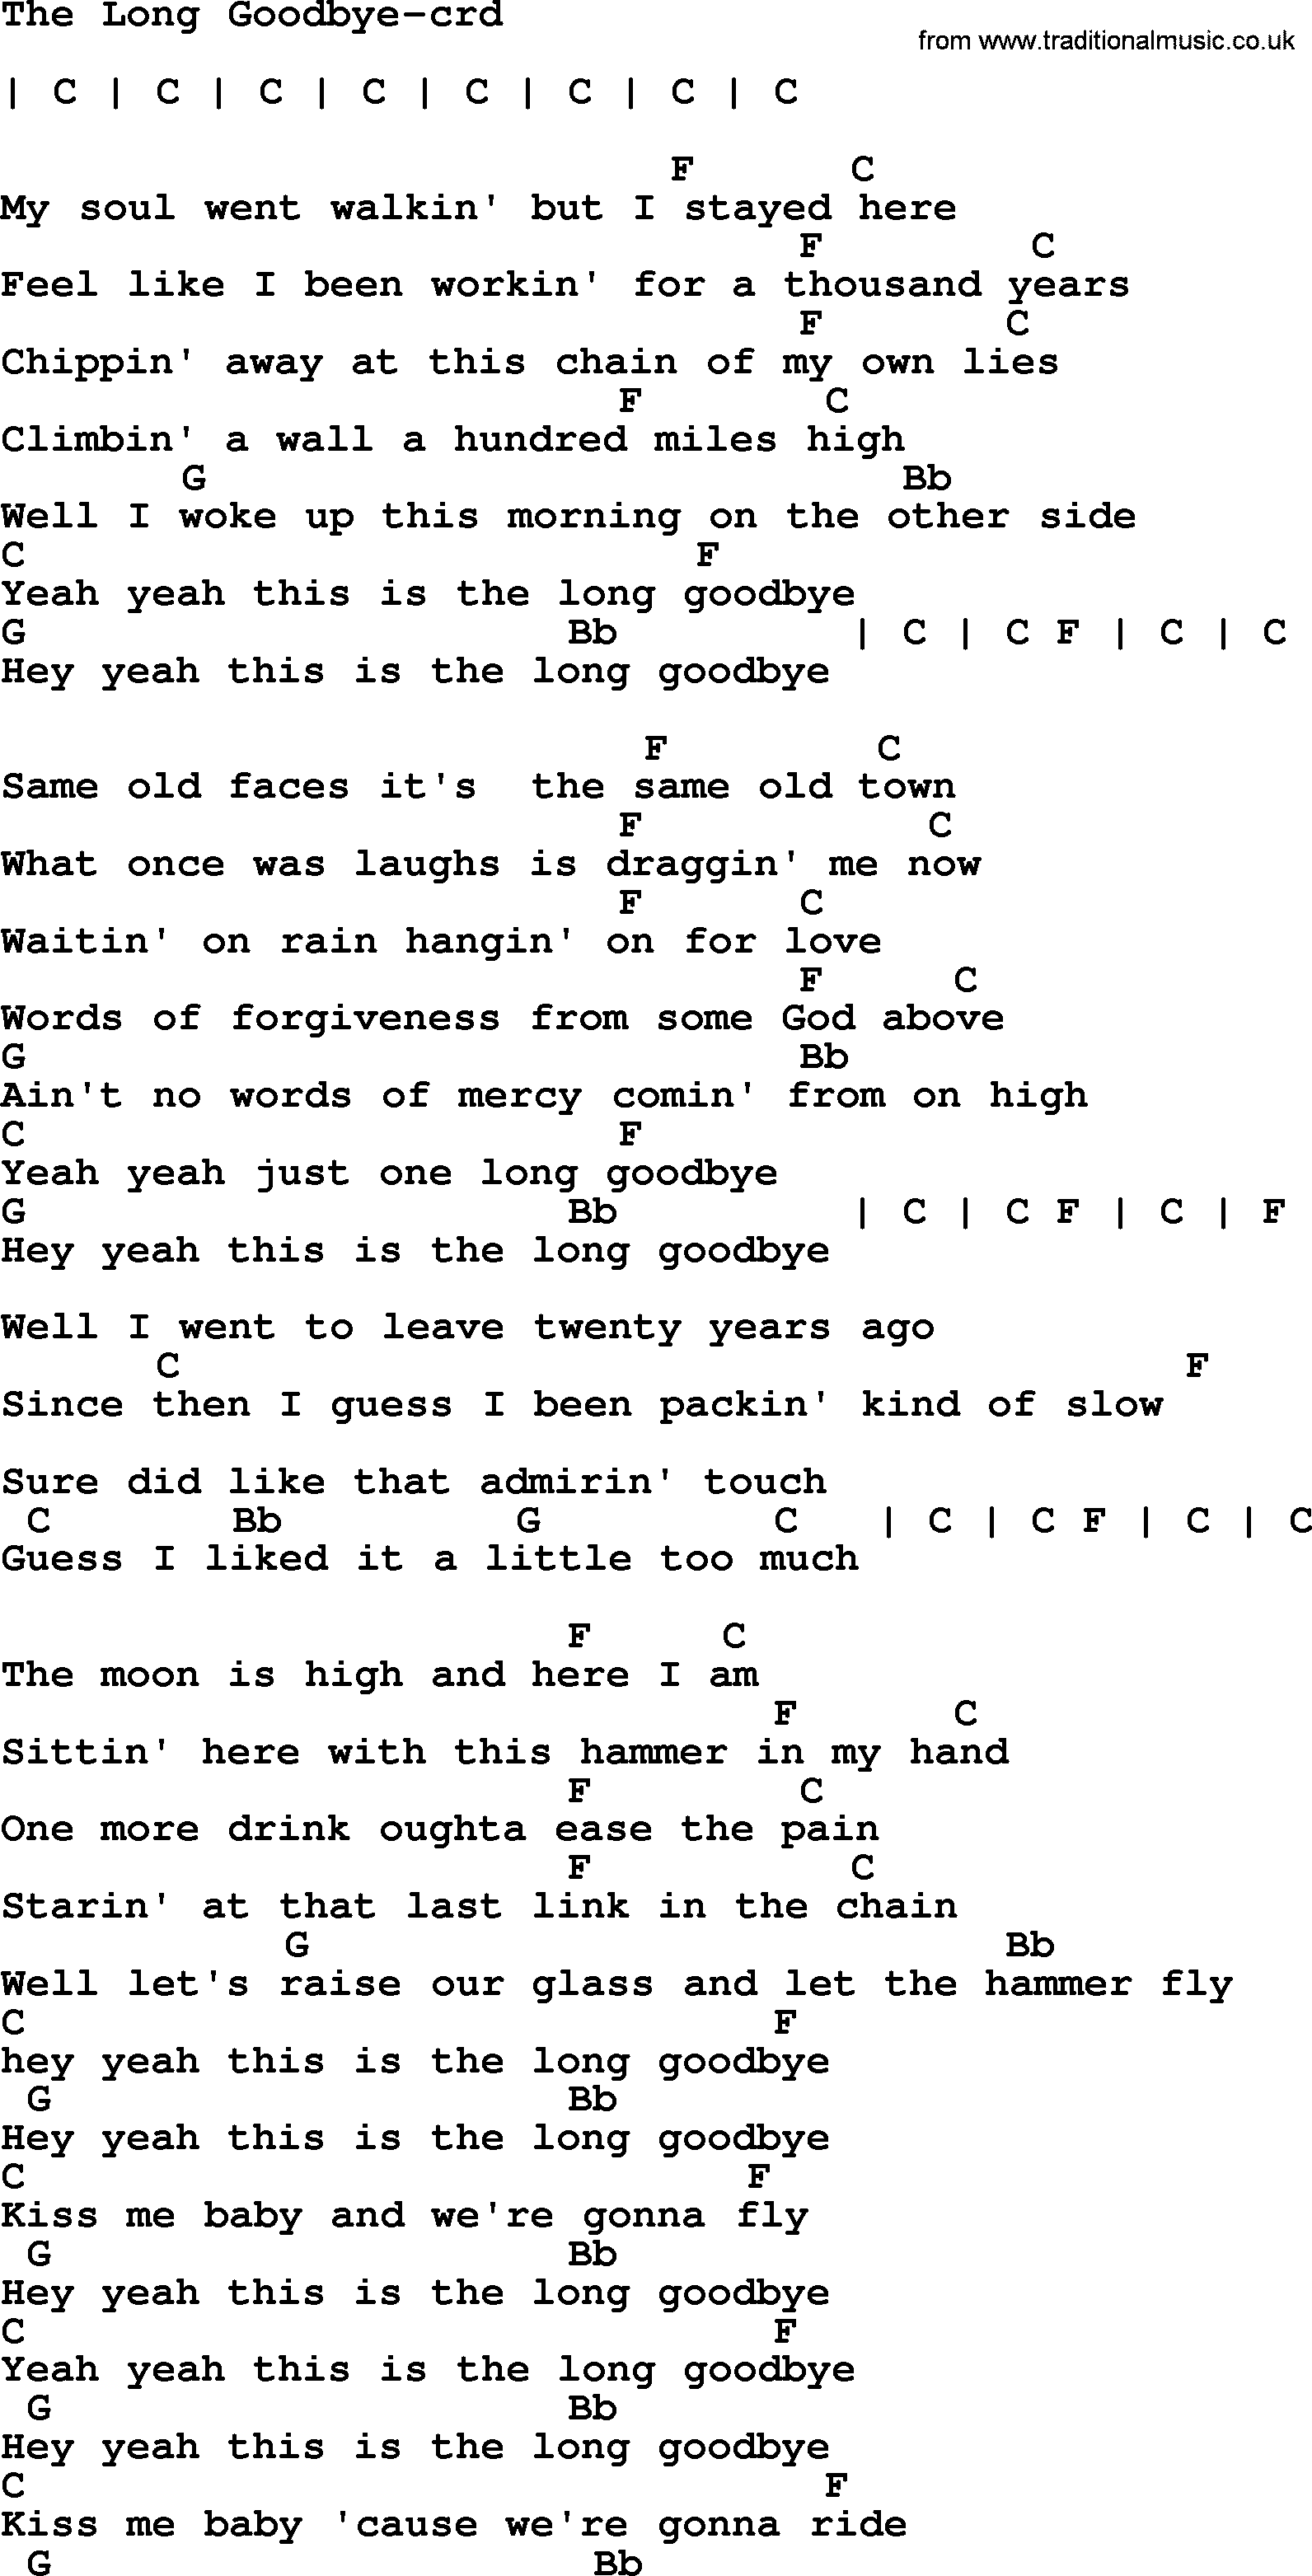 Bruce Springsteen song: The Long Goodbye, lyrics and chords